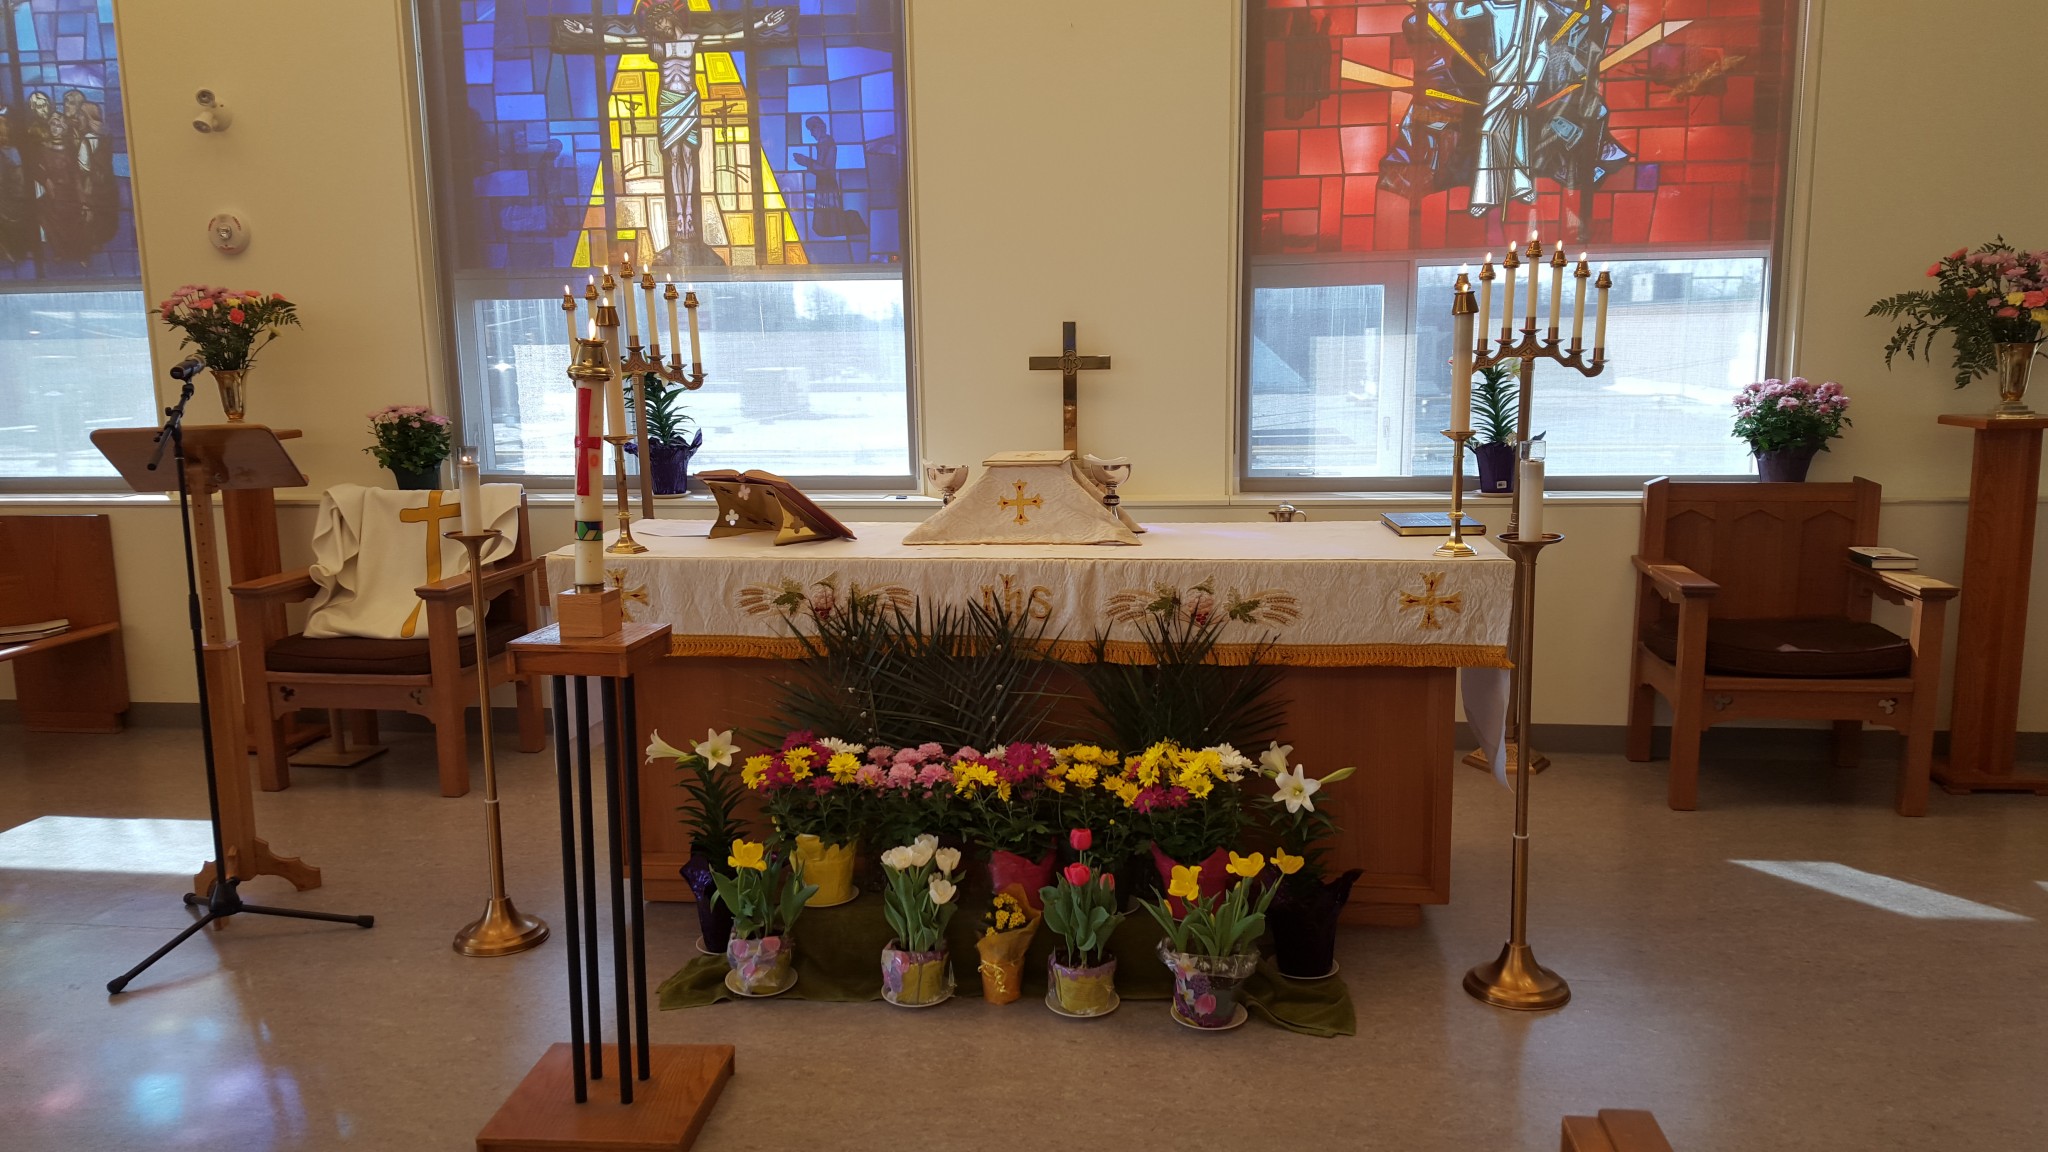 Fourth Sunday of Easter – April 25, 2021